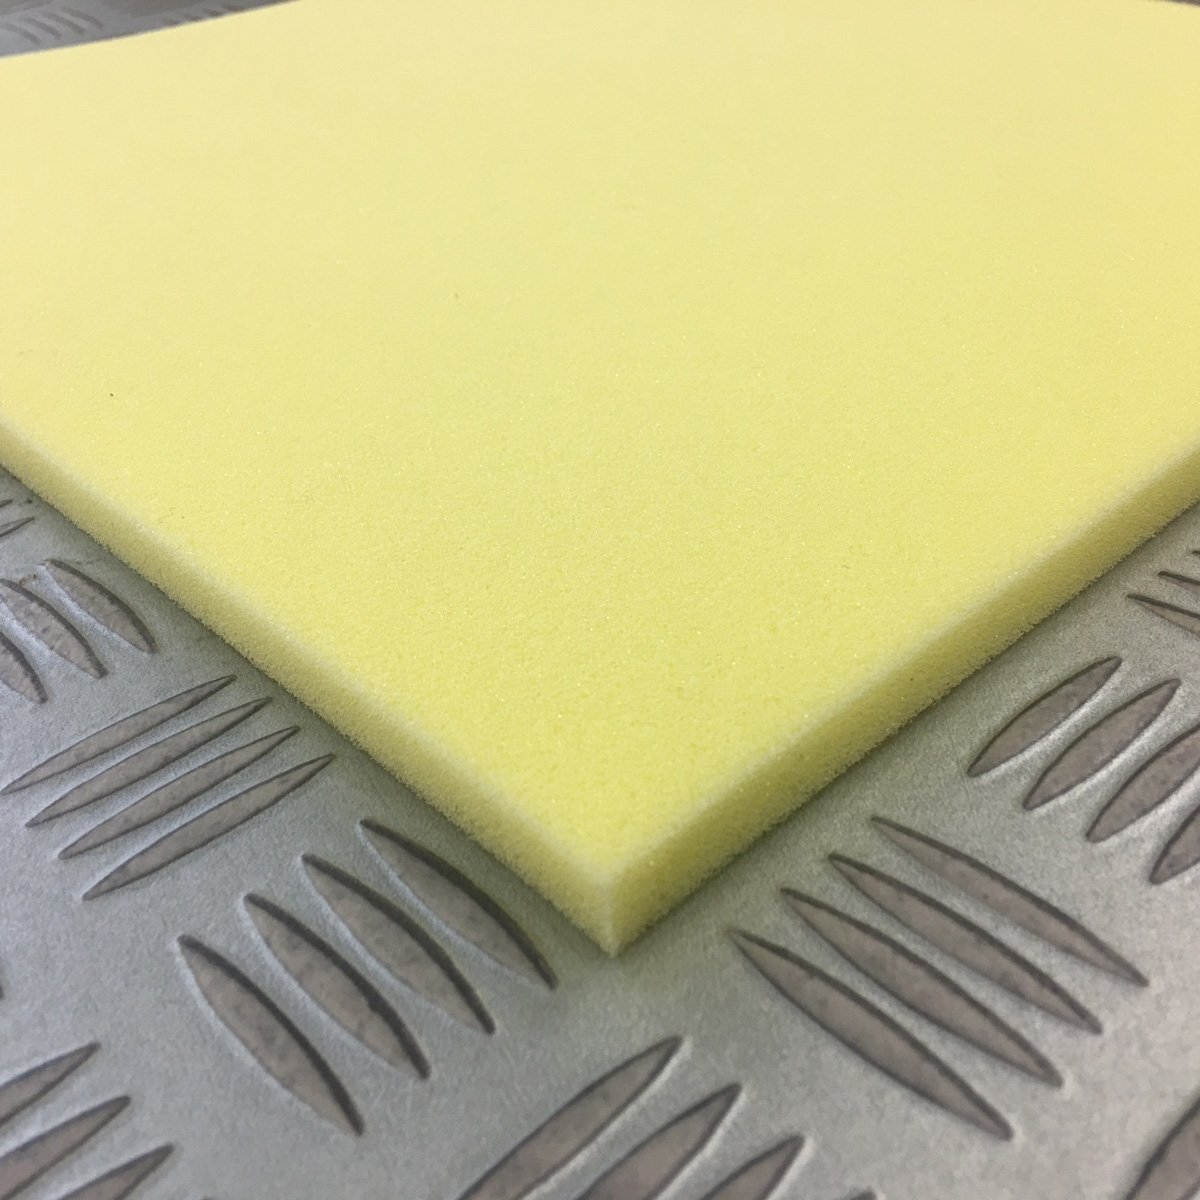  urethane foam [EX-10. thickness ] hardness hard firmly width 1200x length 2000mm sponge / mat / seat repair / sleeping area in the vehicle for bed / camper 